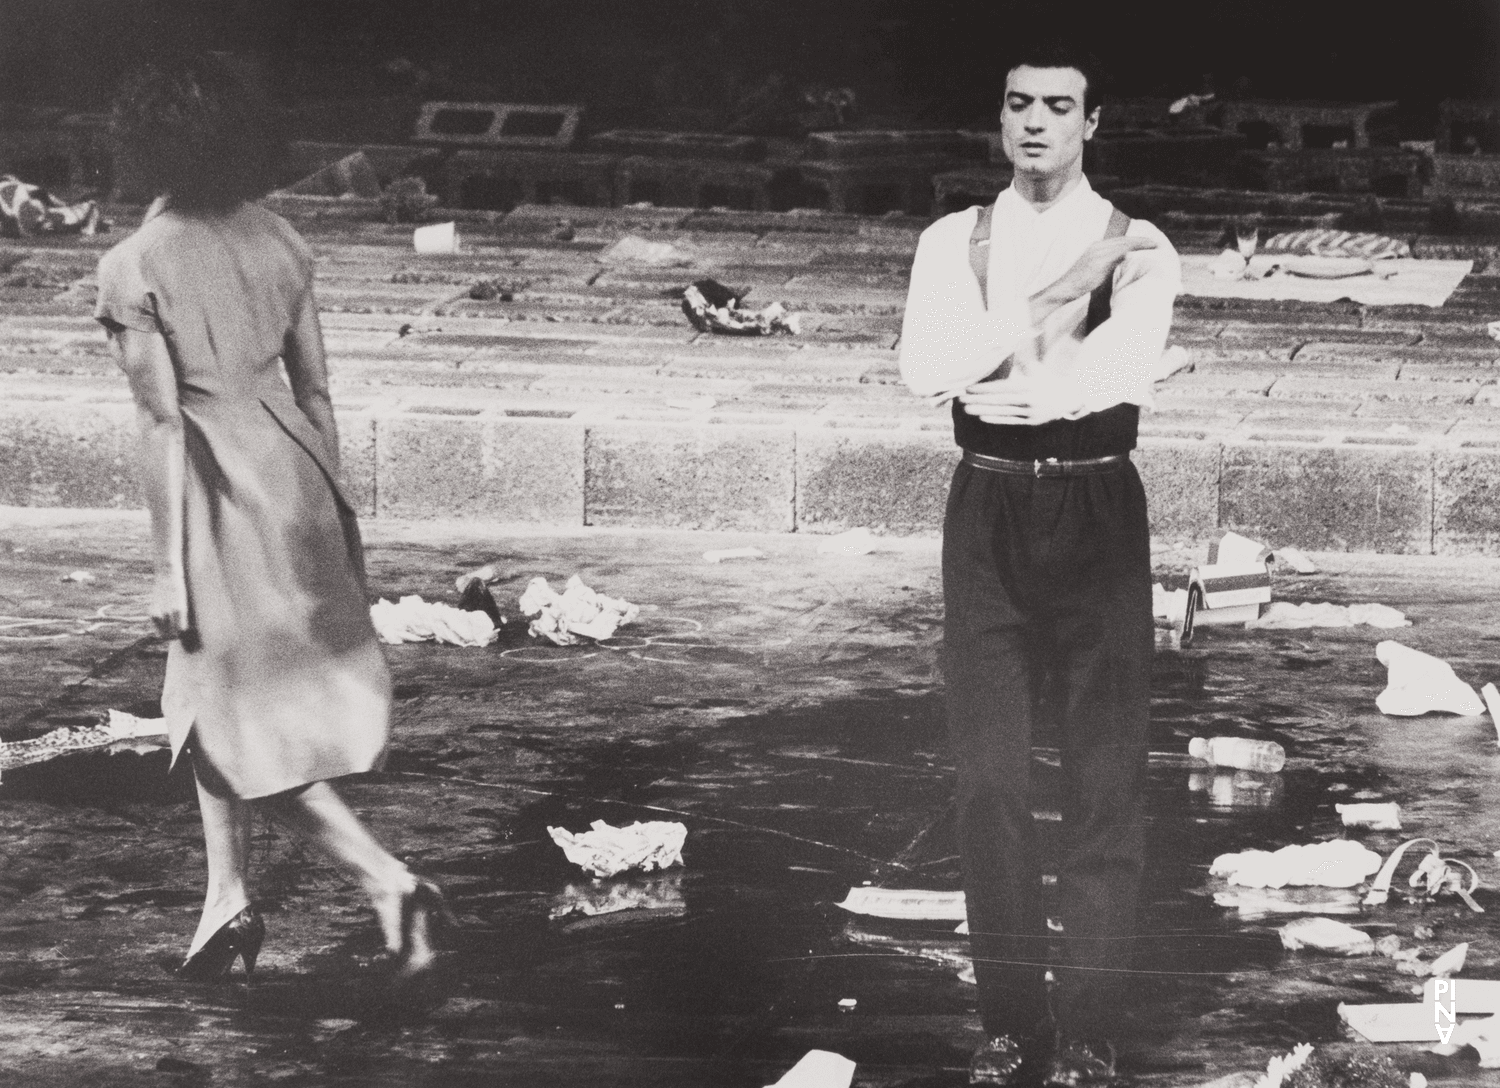 Antonio Carallo in “Palermo Palermo” by Pina Bausch